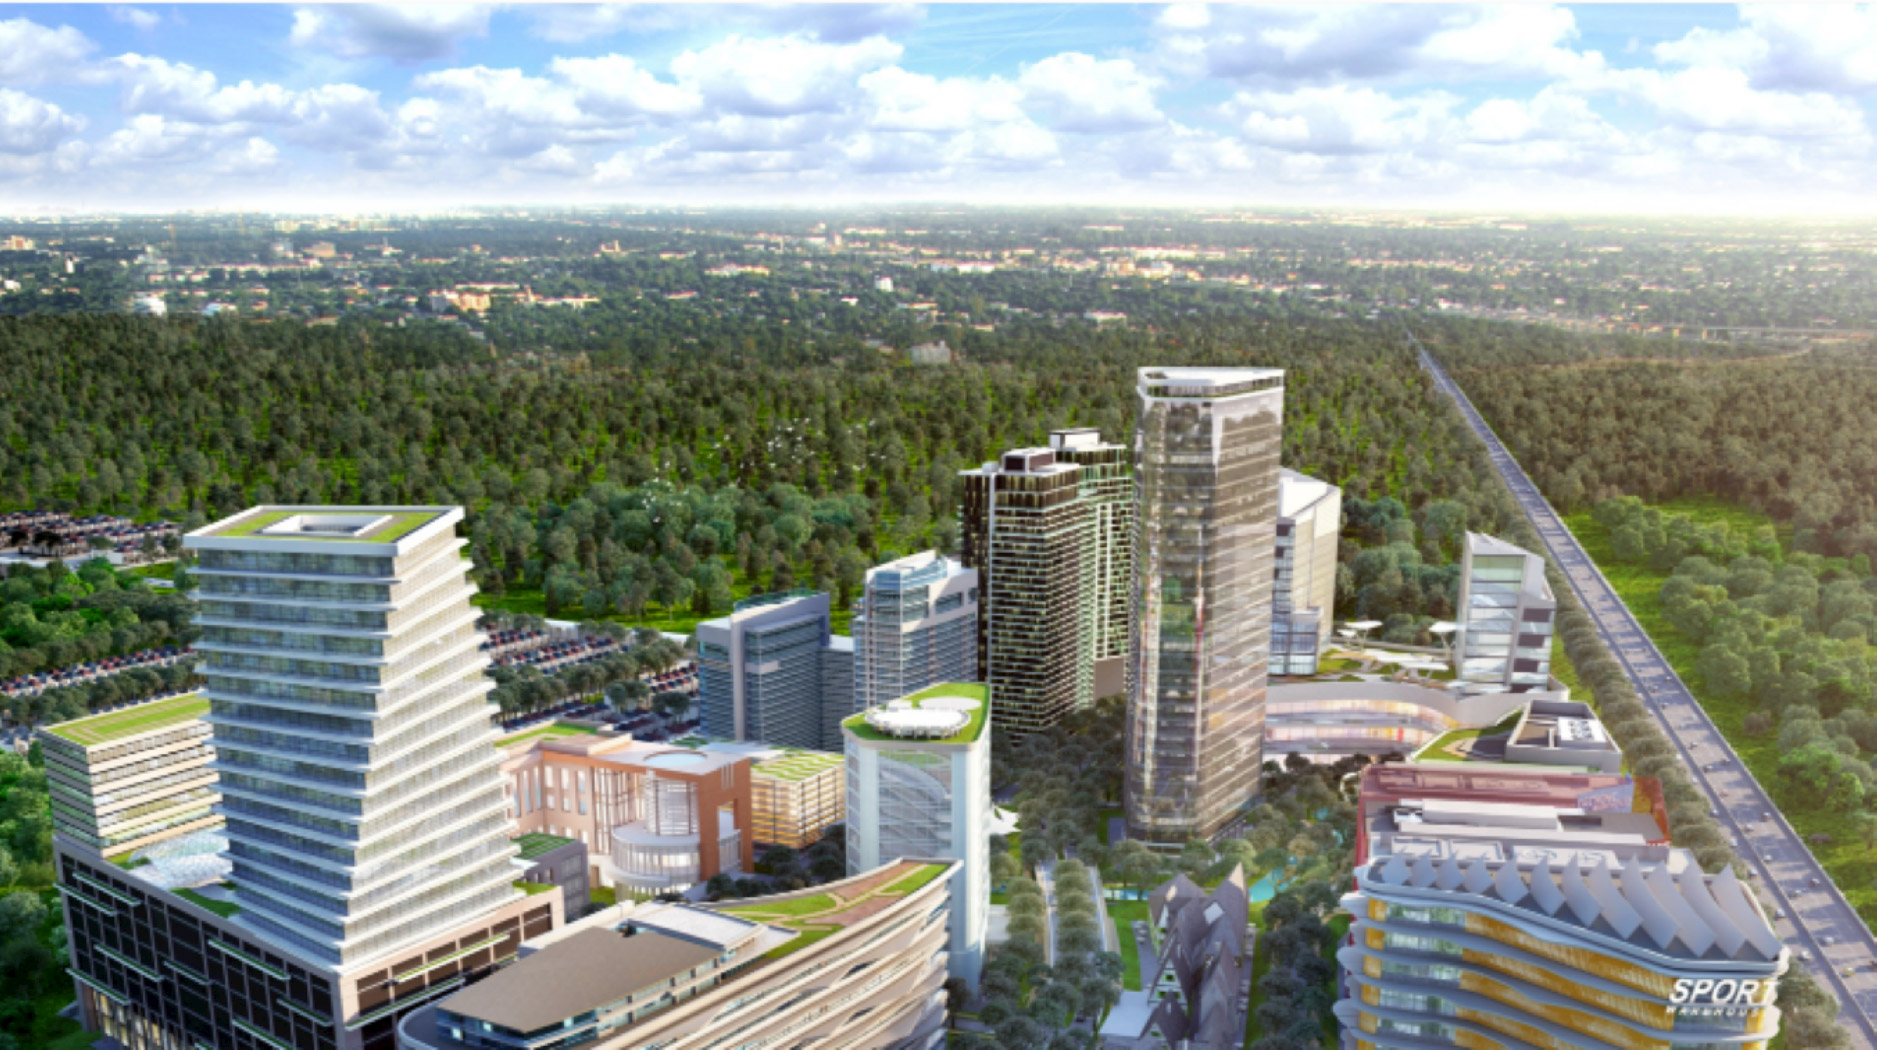 Emerald Neopolis, A Masterplan Development for the New Green and Well-Connected Karawang